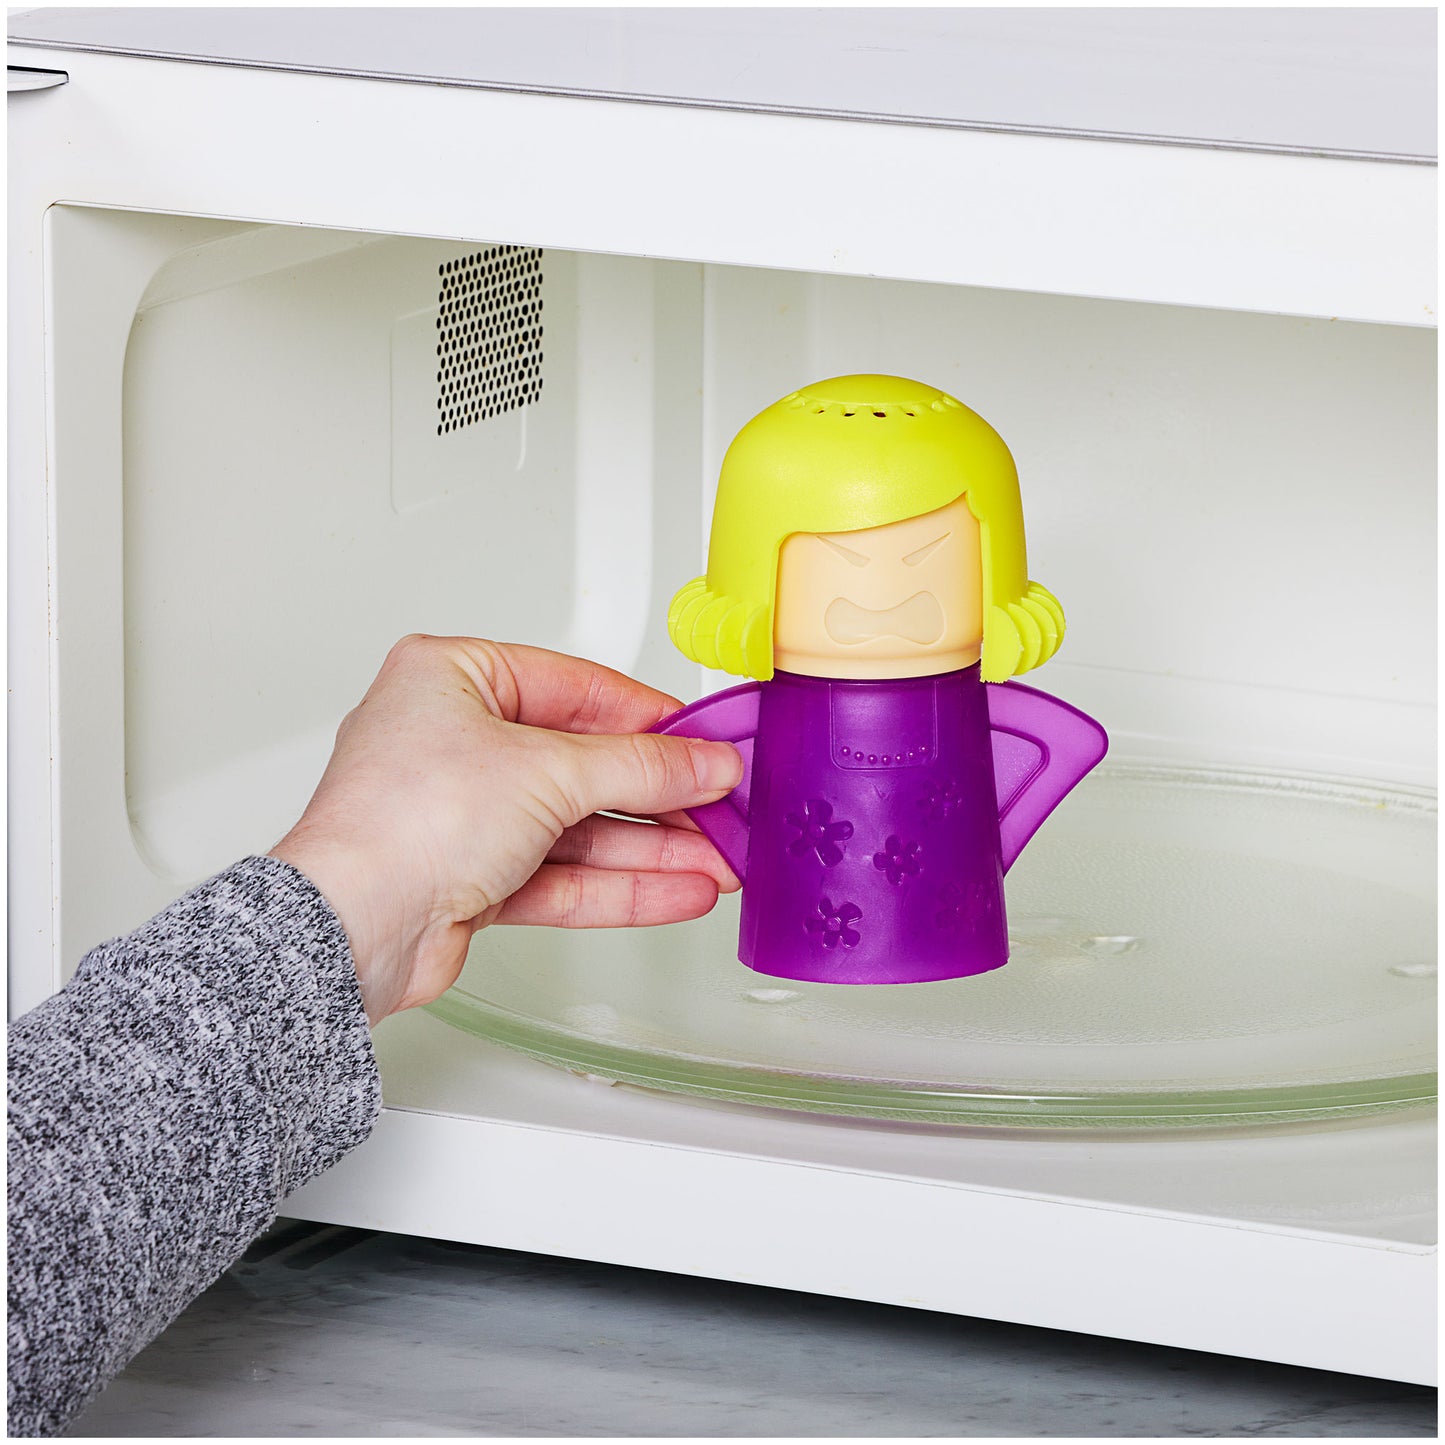 Mad Mama Microwave Cleaner Assorted